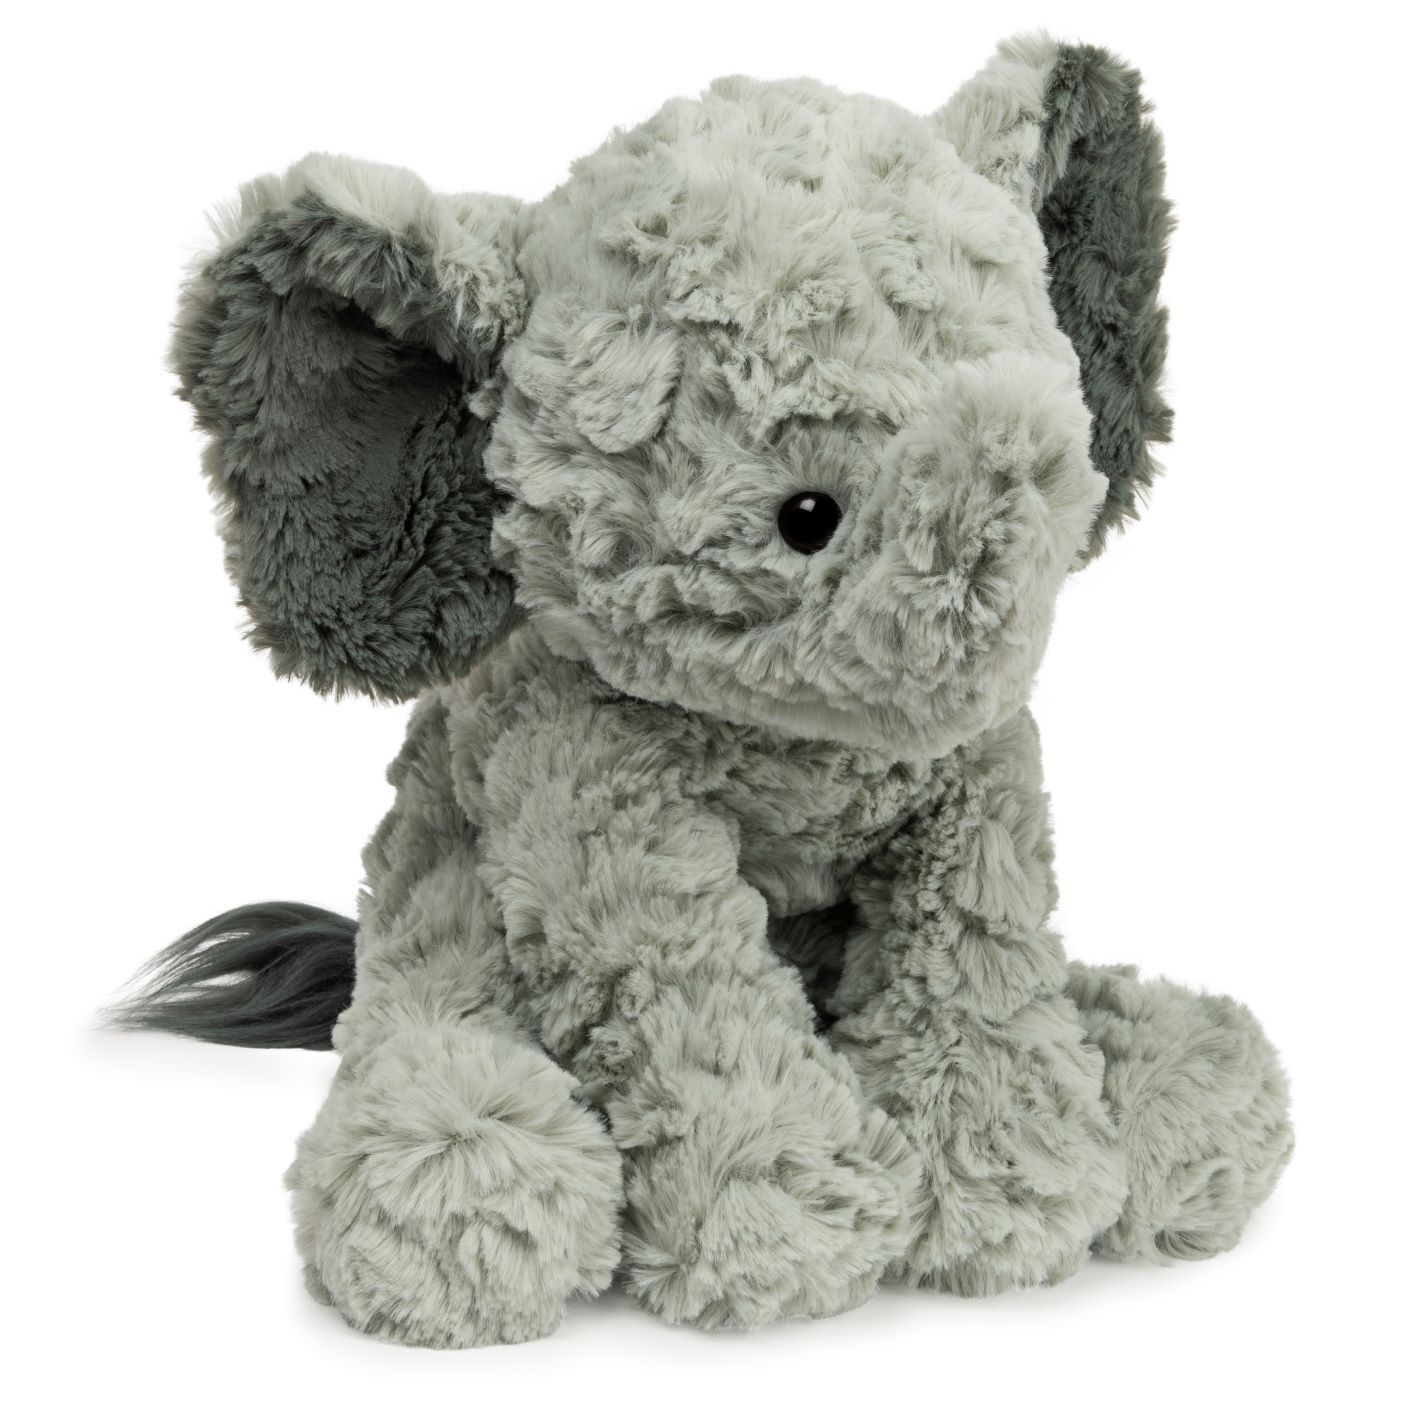 GUND Cozys Elephant Stuffed Animal Plush Toy 10 Inches for sale online 